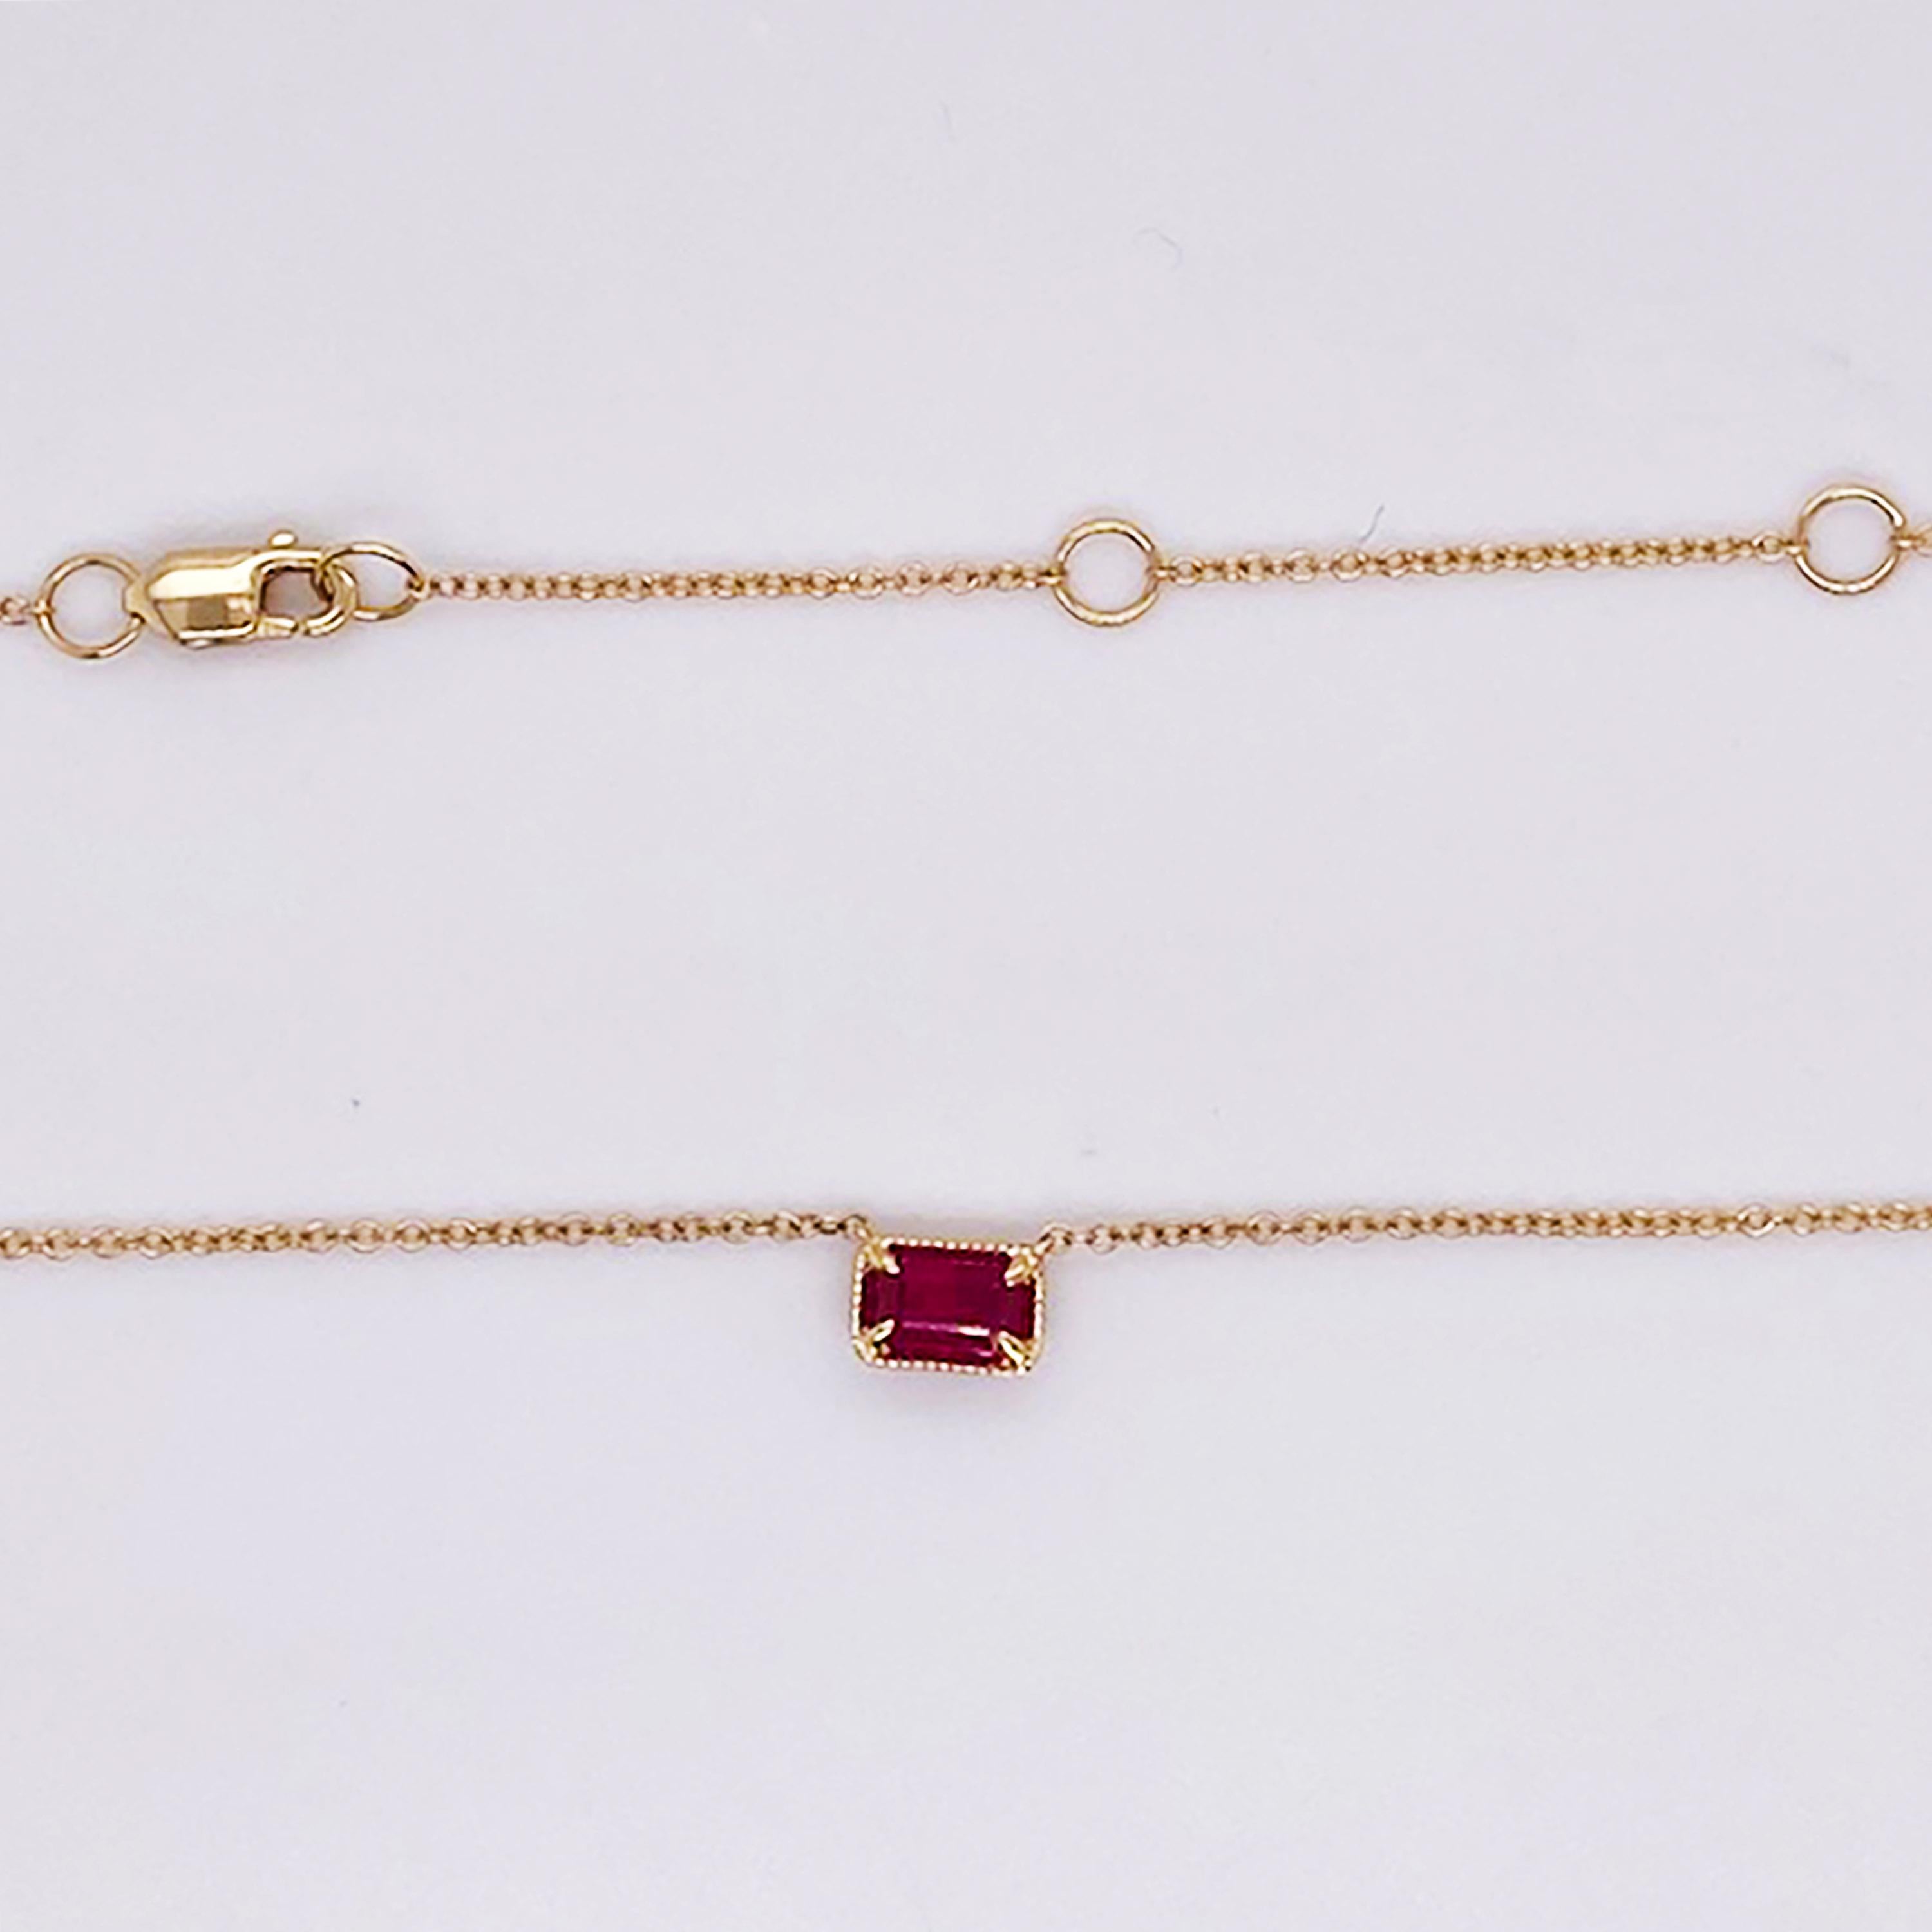 This petite necklace is perfect on anyone! The chain is 1 millimeter in width and the ruby is 4 x 2 millimeters and is beautiful in the emerald cut shape. You will love this necklace. All the yellow gold is solid 14 karat yellow gold.
Material: 14K